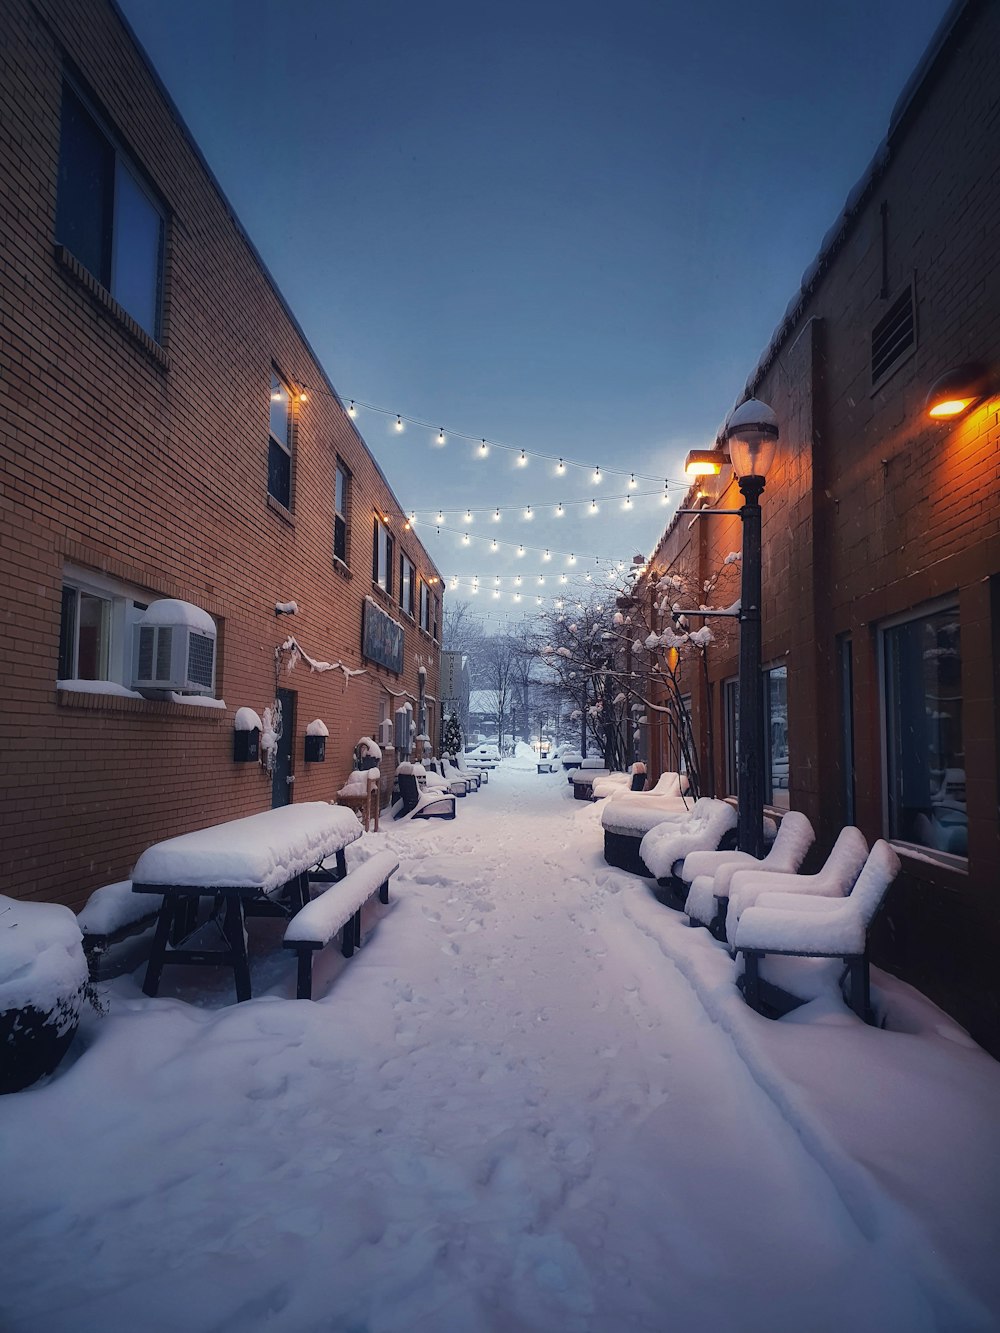 a snowy street lined with benches and lights